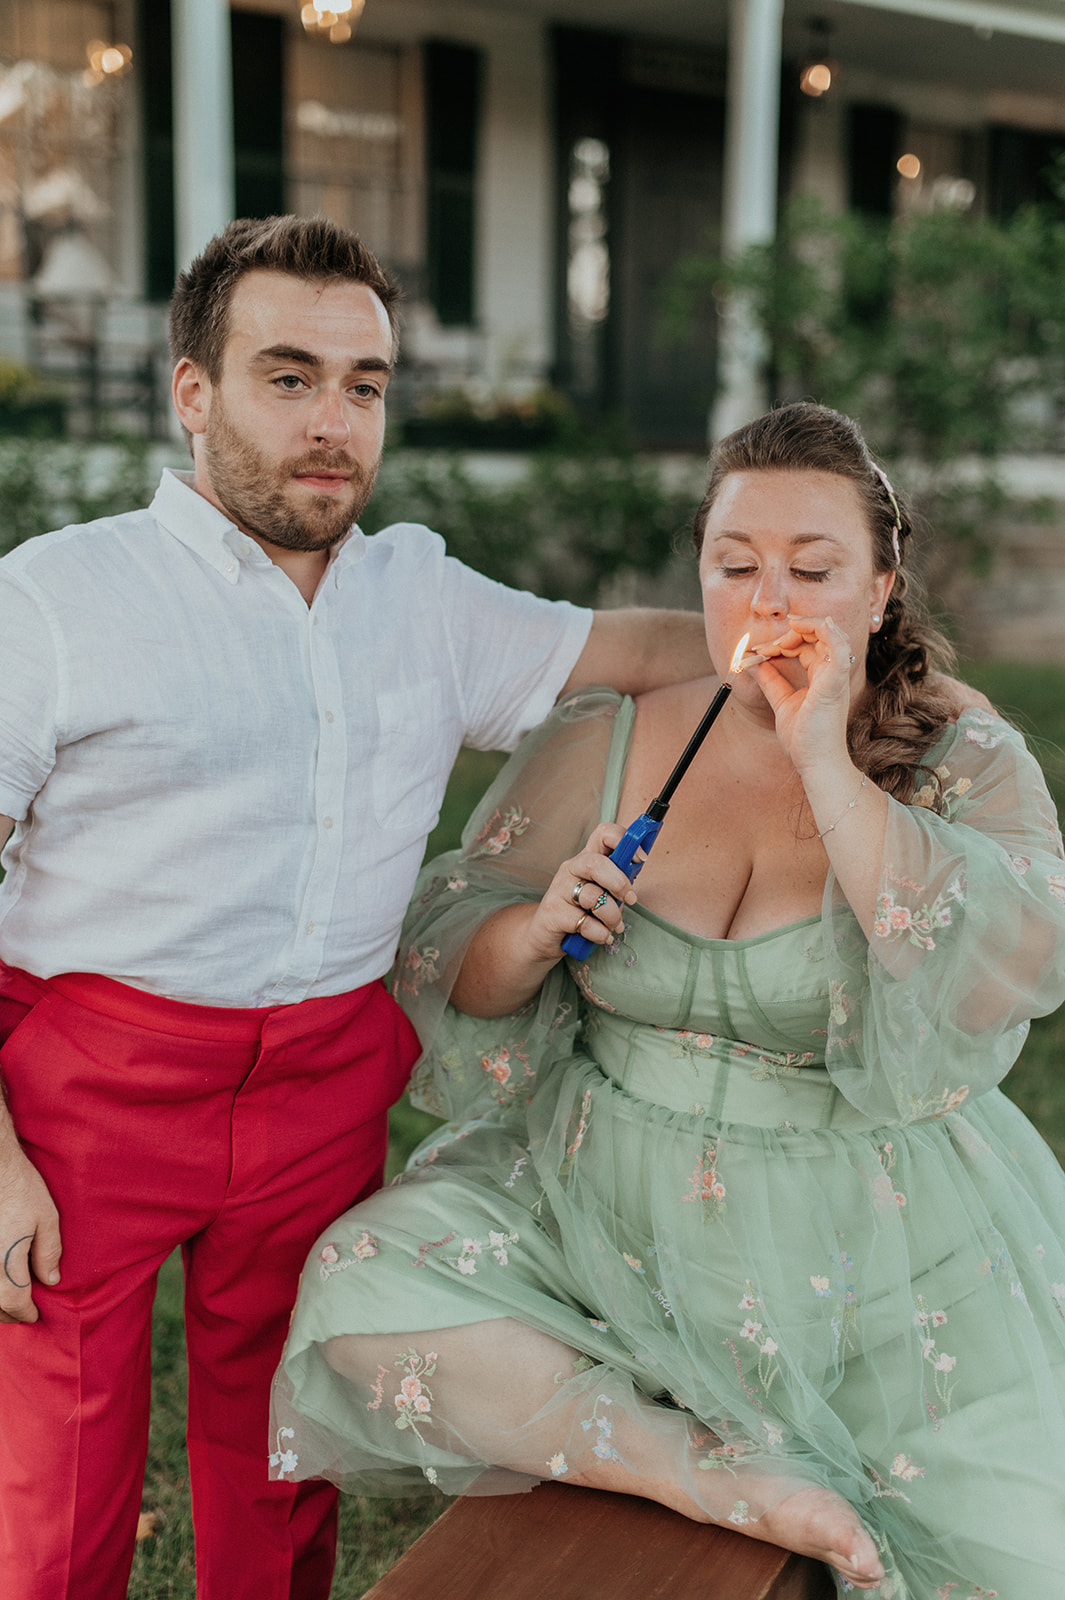 Bride and groom change into reception outfits and share a joint